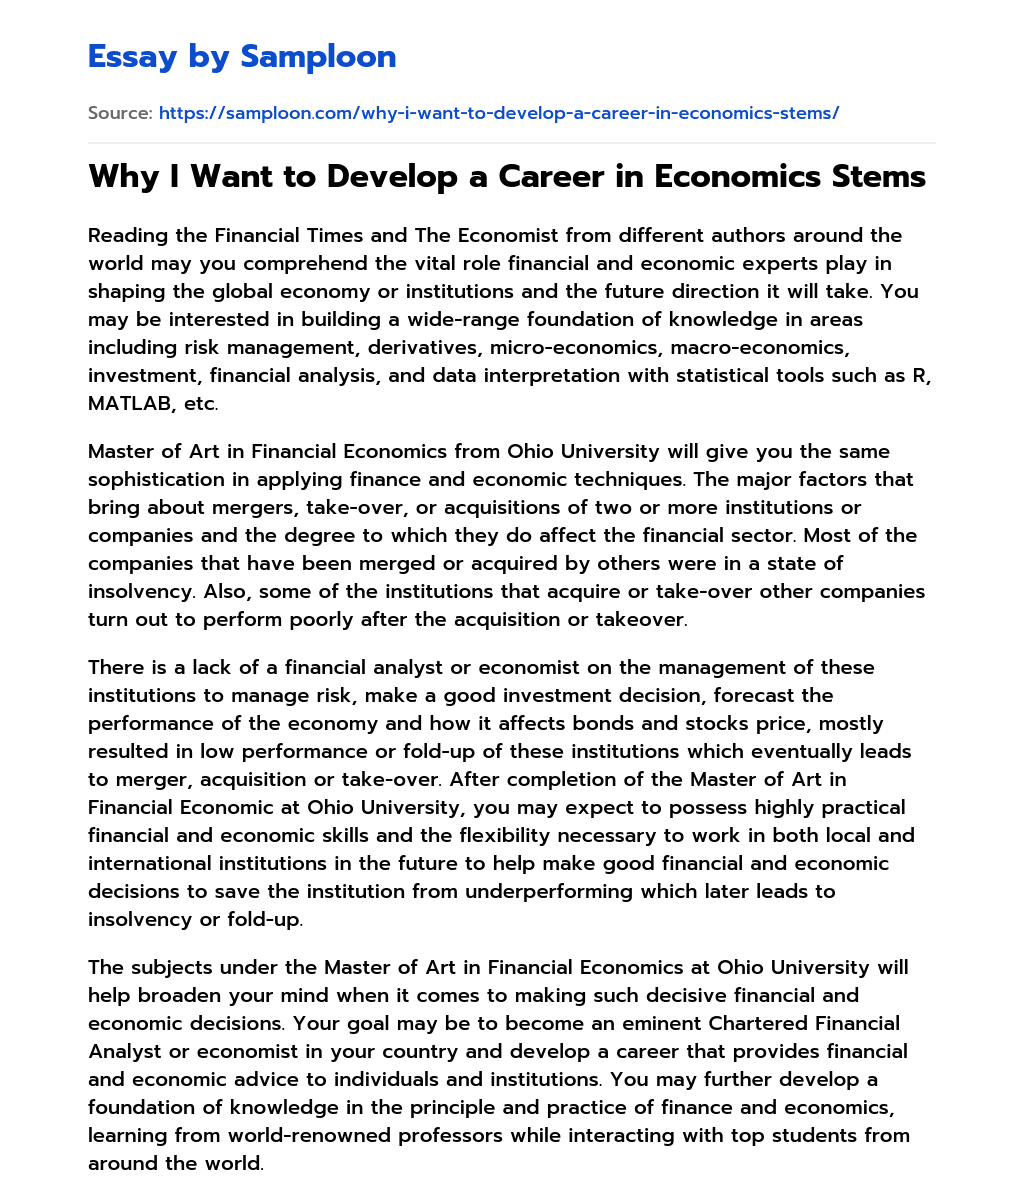 Why I Want to Develop a Career in Economics Stems essay